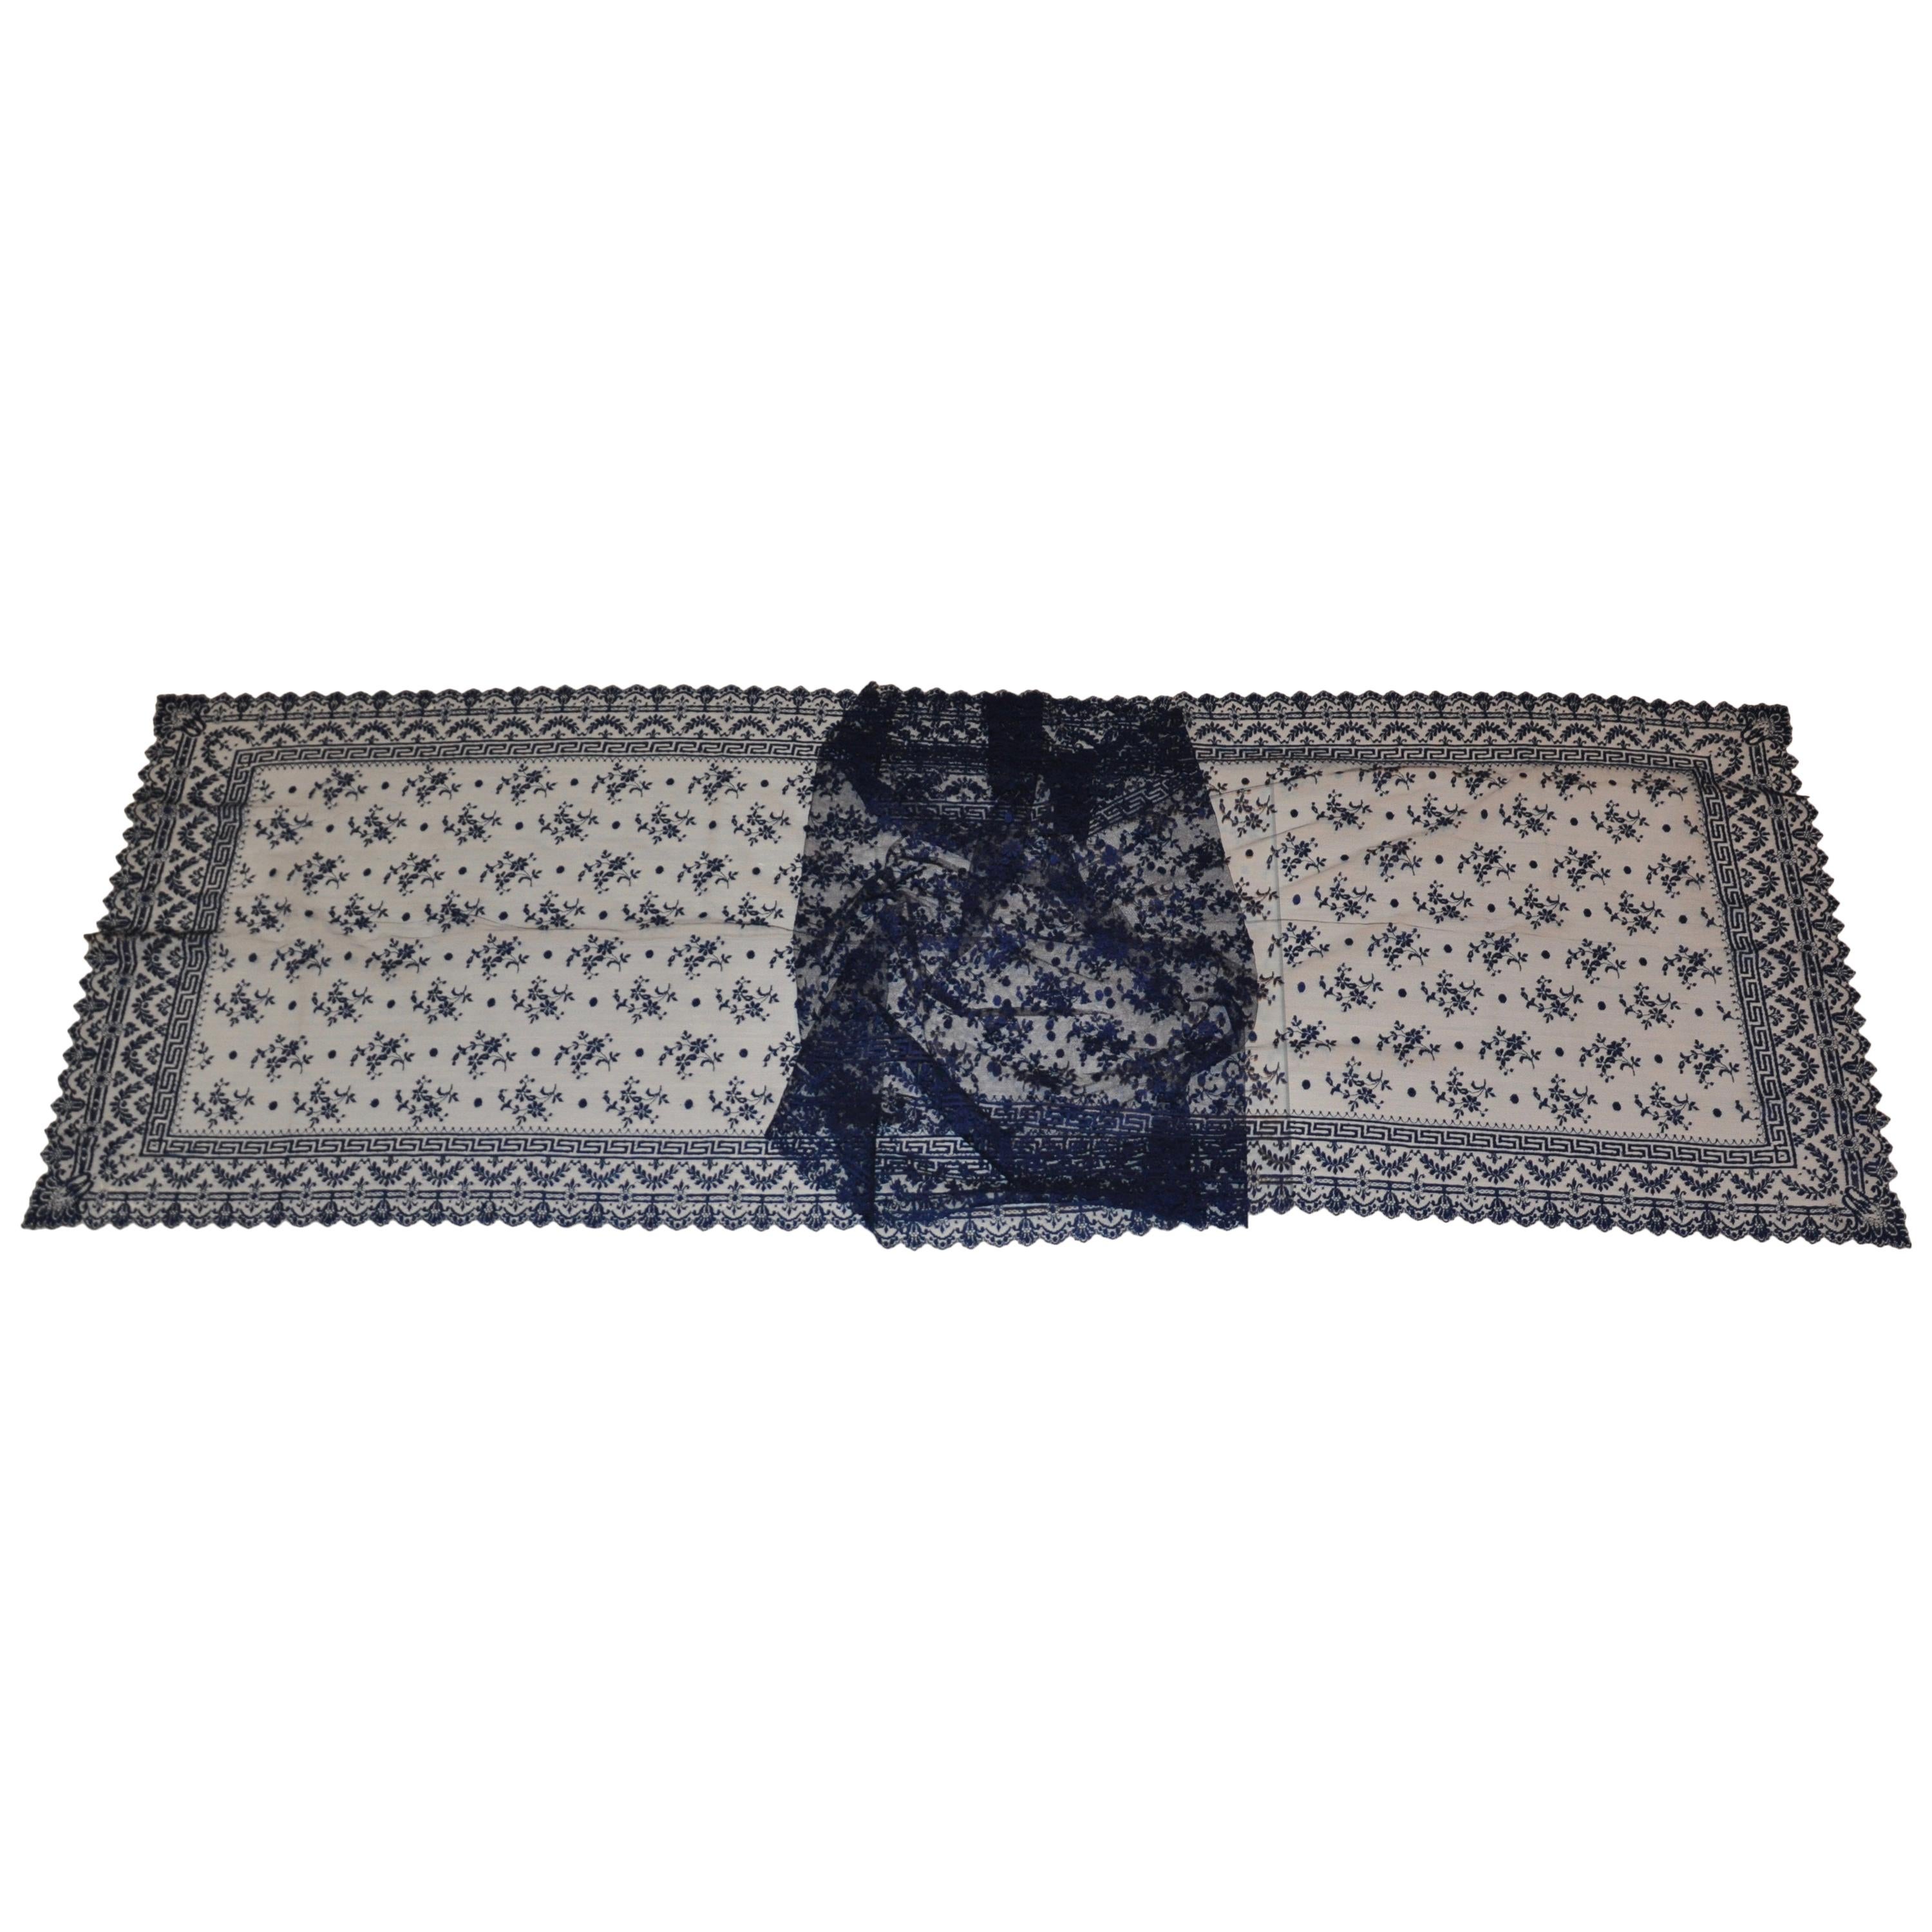 Midnight Blue Large Hand-Woven French Lace Floral with Scallop Edges Shawl